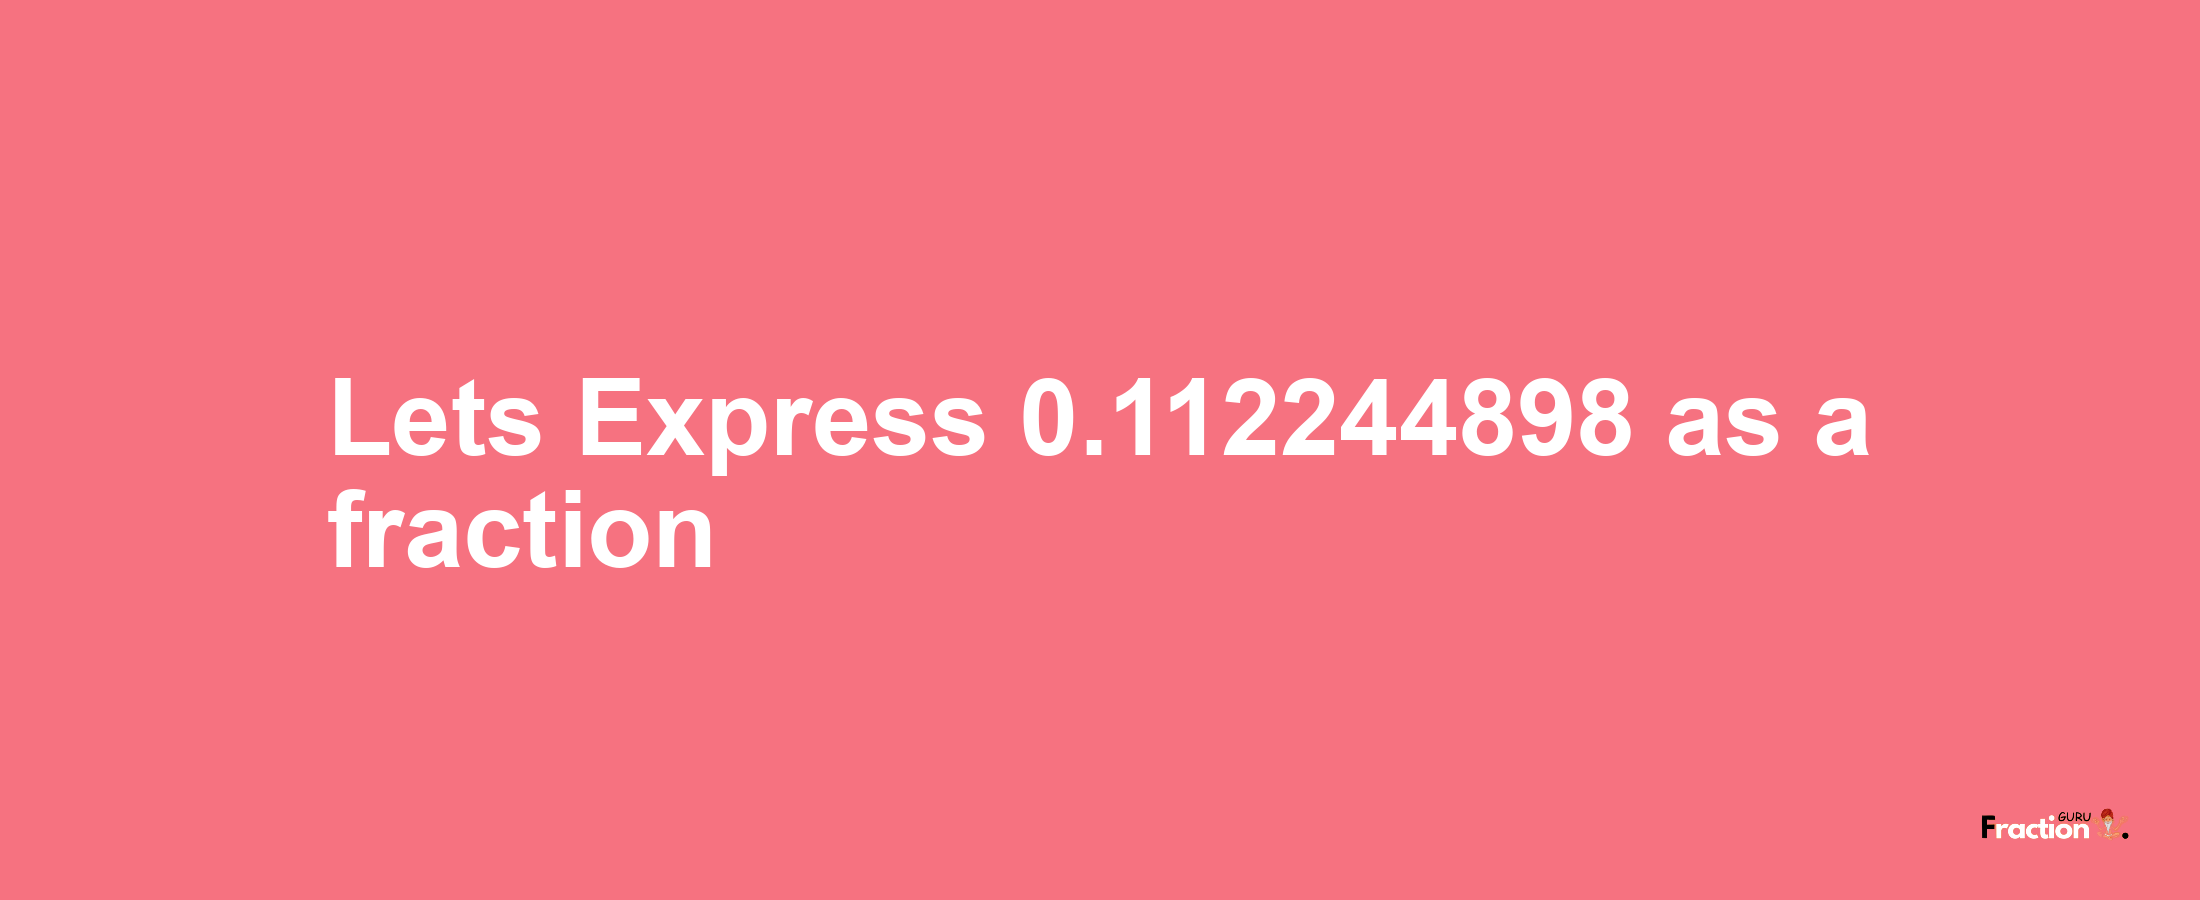 Lets Express 0.112244898 as afraction